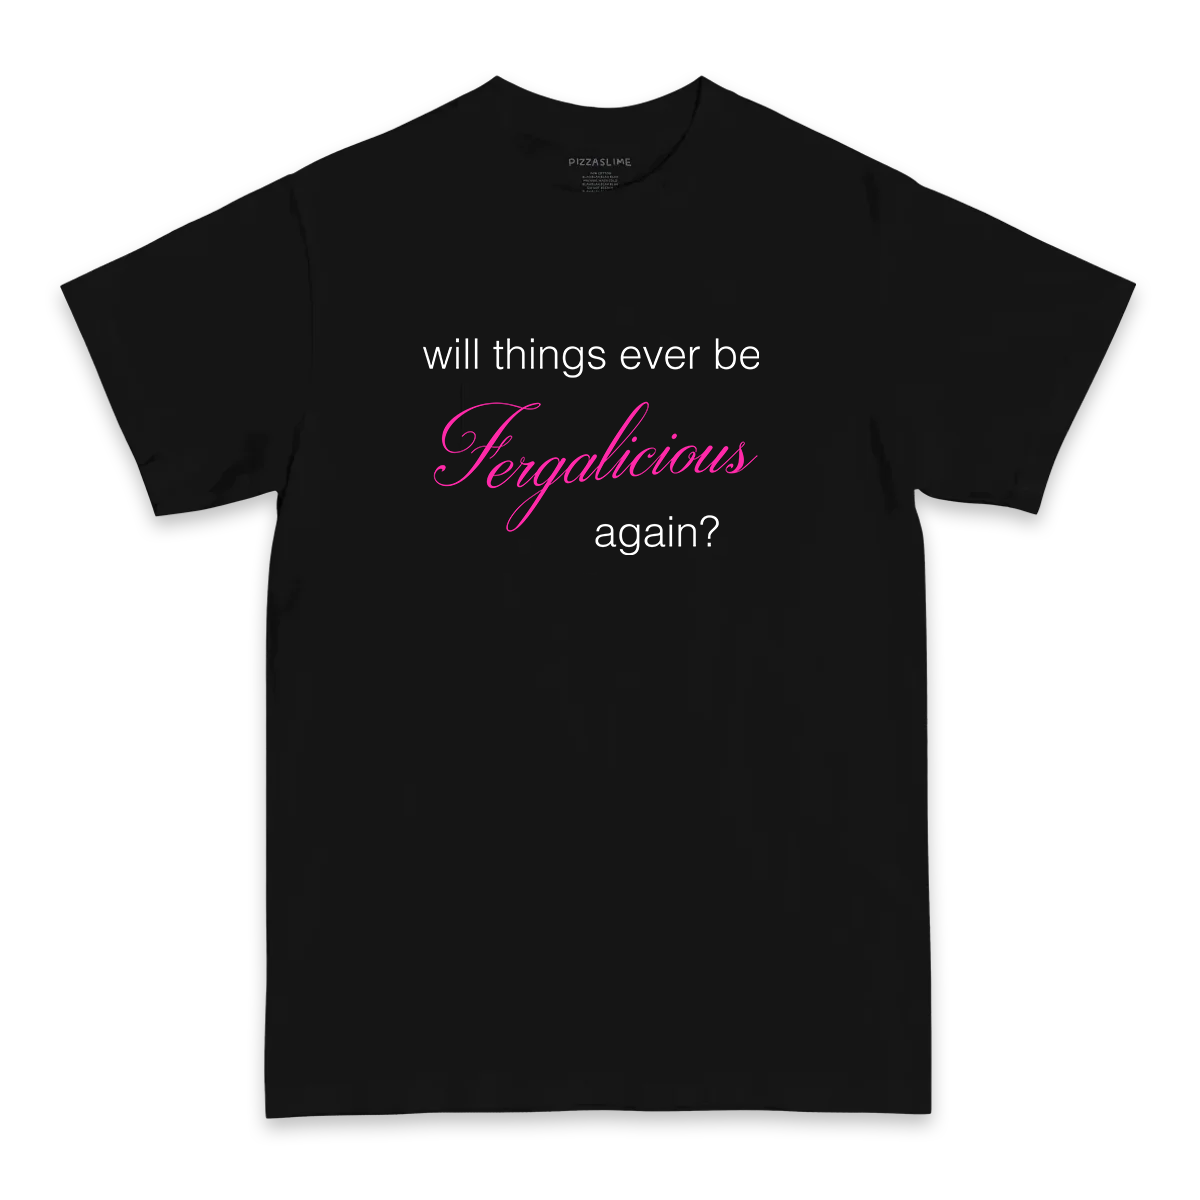 WILL THINGS EVER BE FERGALICIOUS AGAIN? T-Shirt